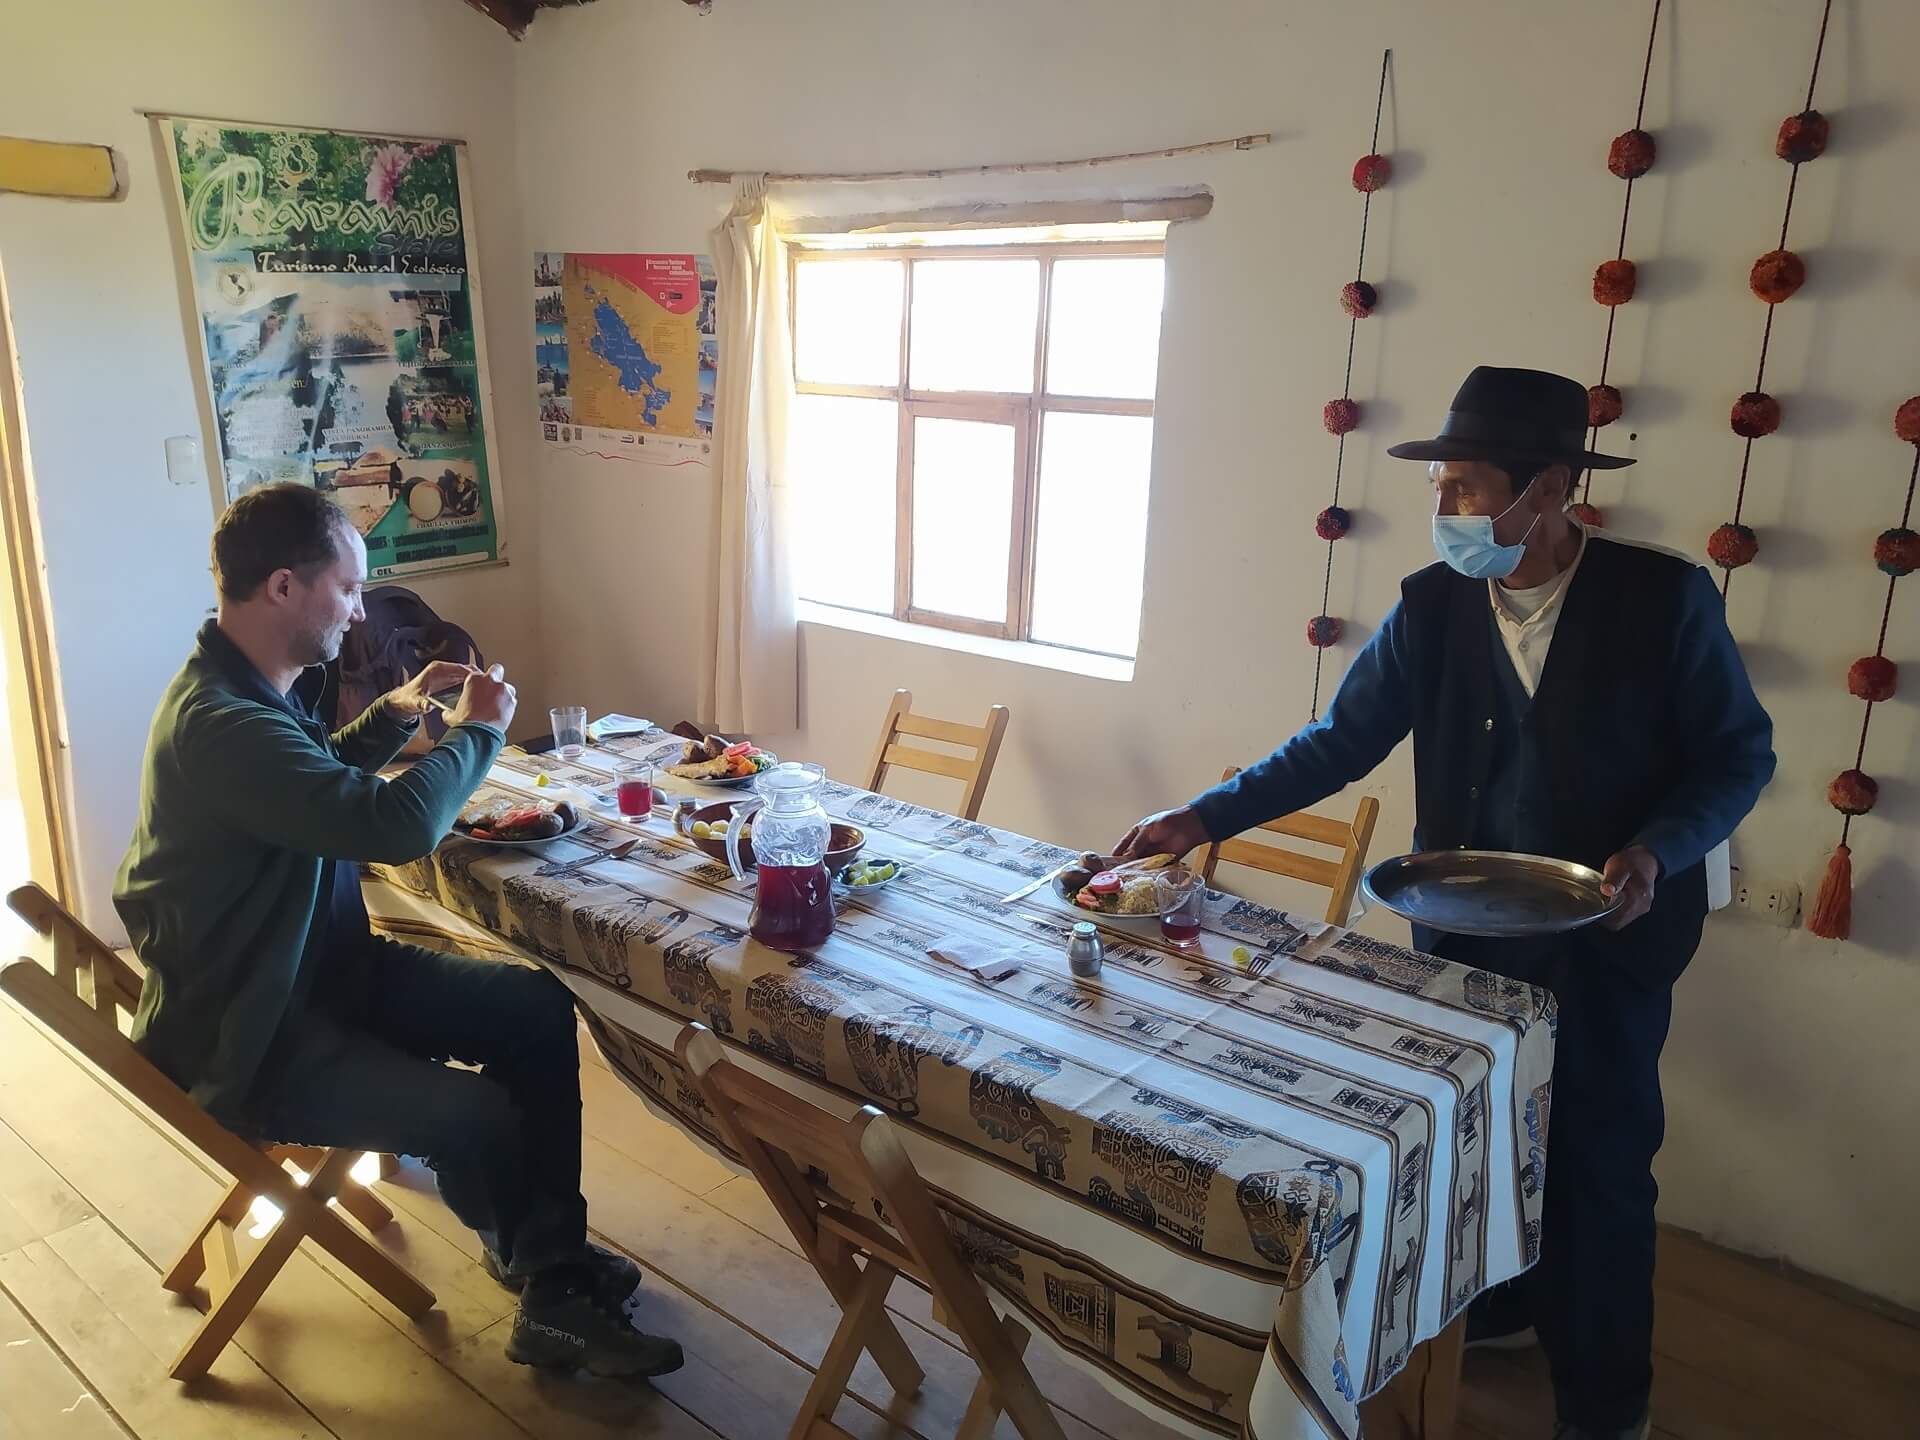 Lunch in a community homestay at Lake Titicaca, Peru, during Covid times. | RESPONSible Travel Peru